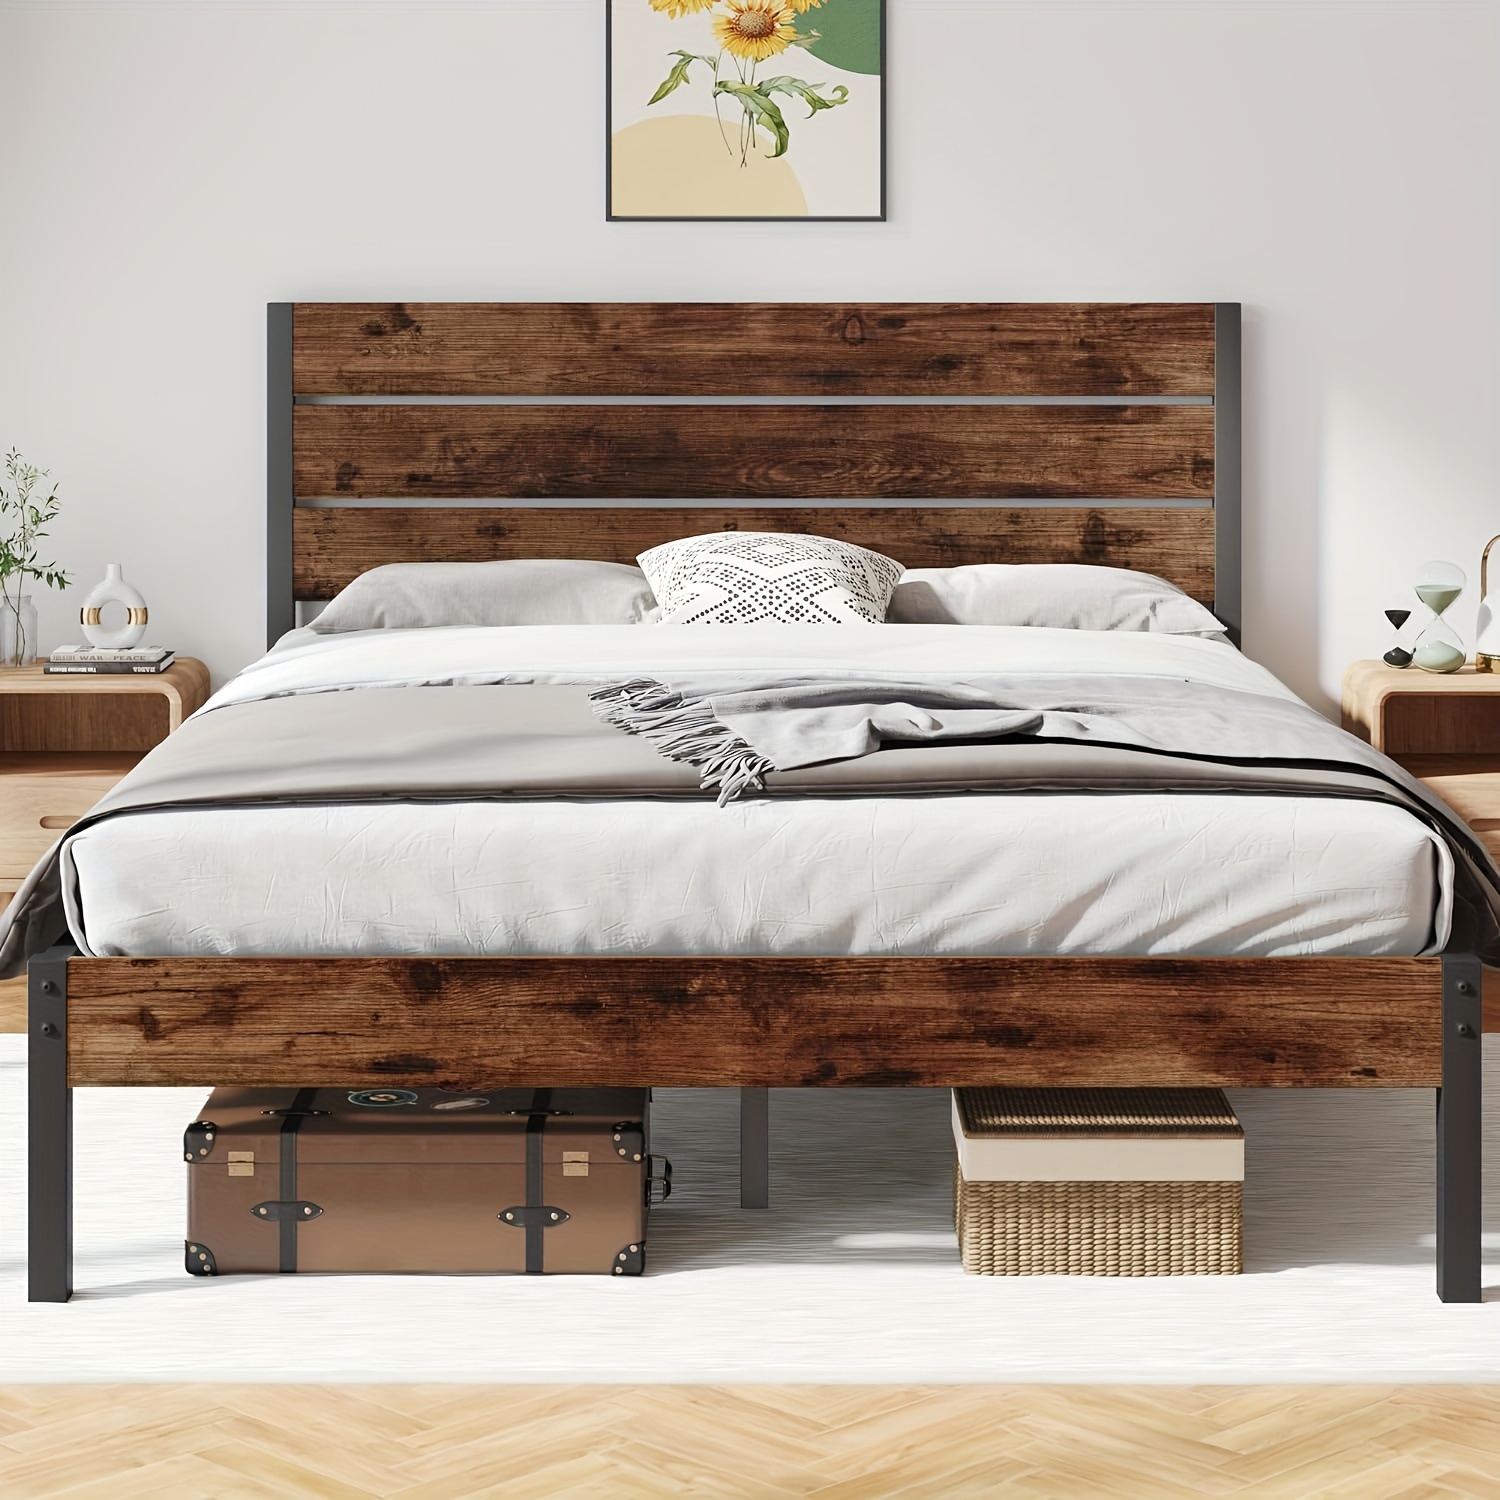 

Queen Bed Frame With Headboard And Footboard, With Under Bed Storage, All-metal Support System, No Box Spring Needed, Easy Assembly, Rustic Brown